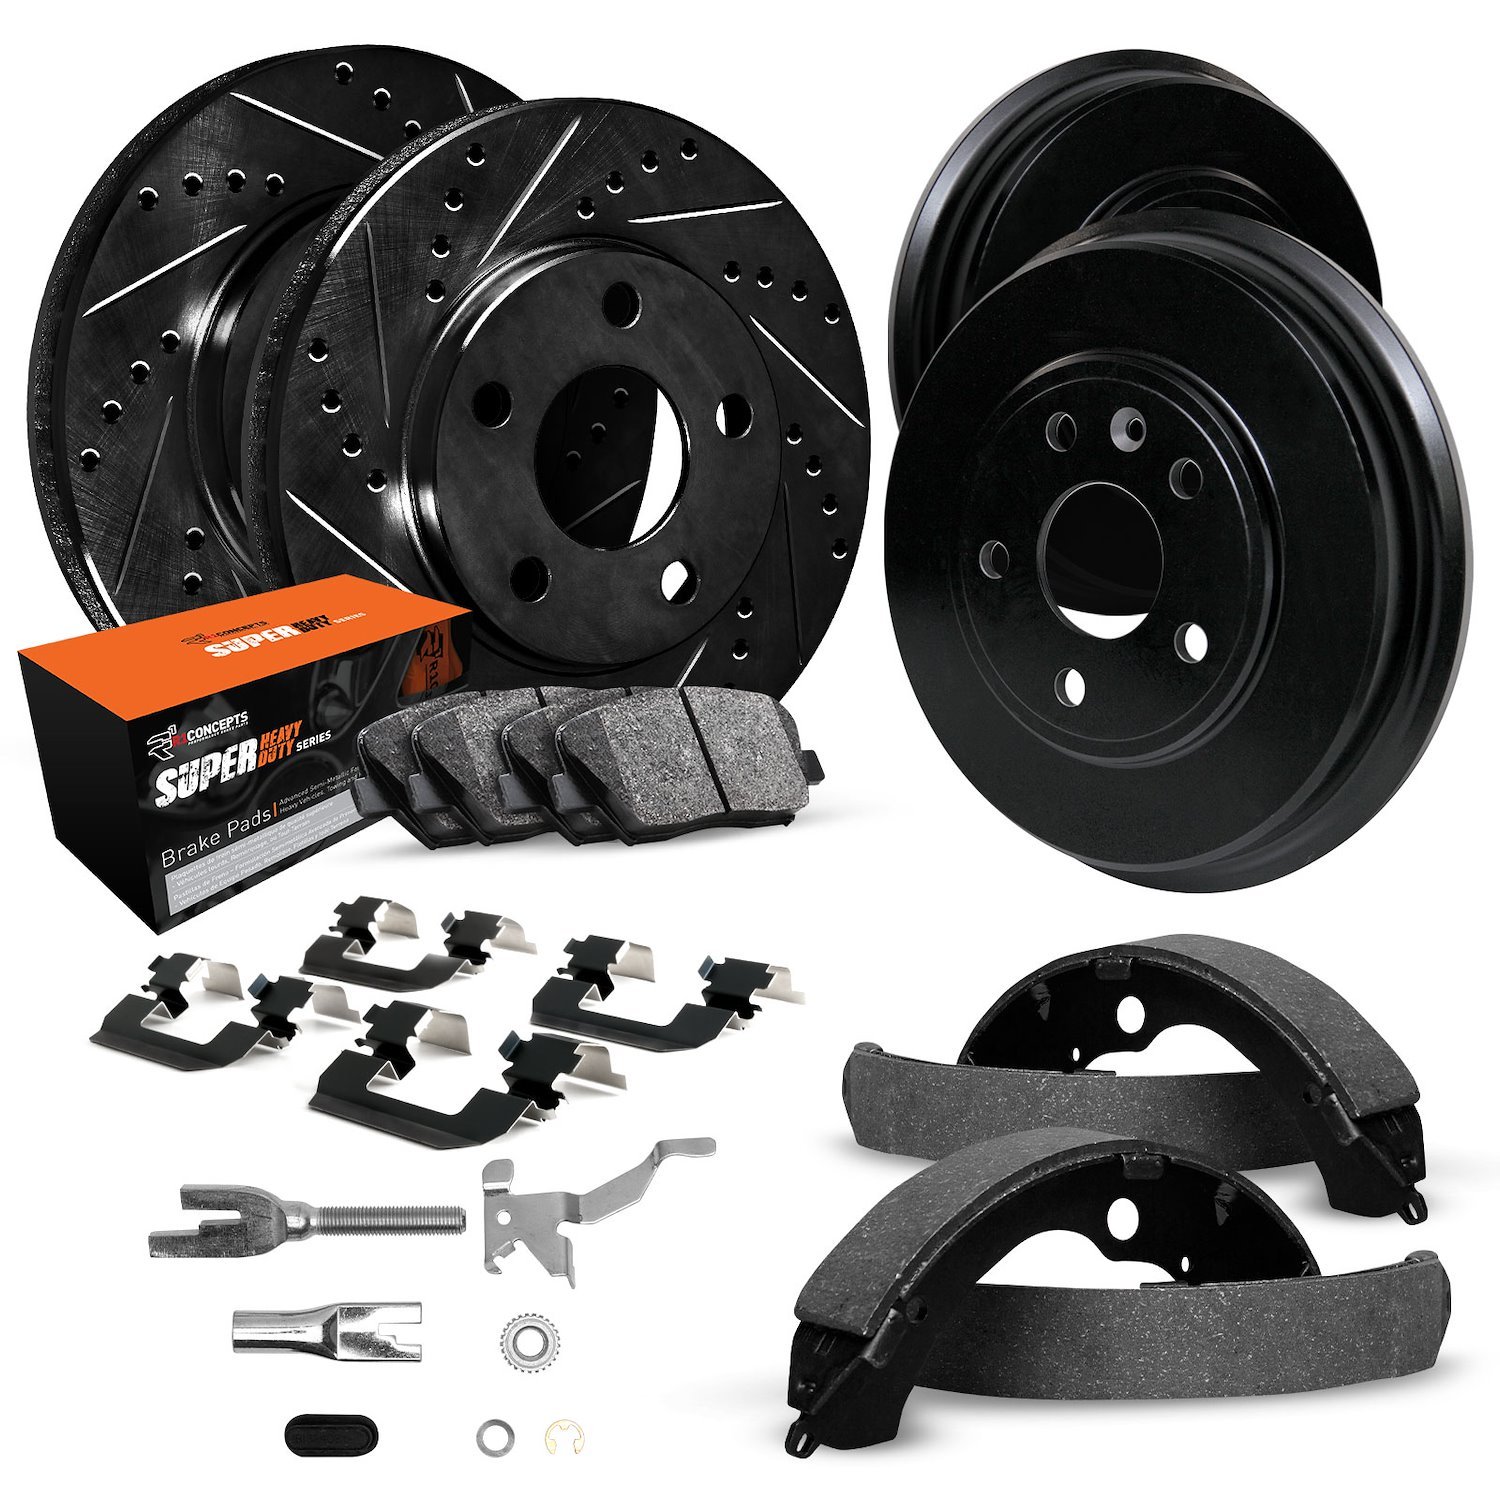 E-Line Drilled/Slotted Black Rotor & Drum Set w/Super-Duty Pads, Shoes, Hardware/Adjusters, 1975-1979 Ford/Lincoln/Mercury/Mazda